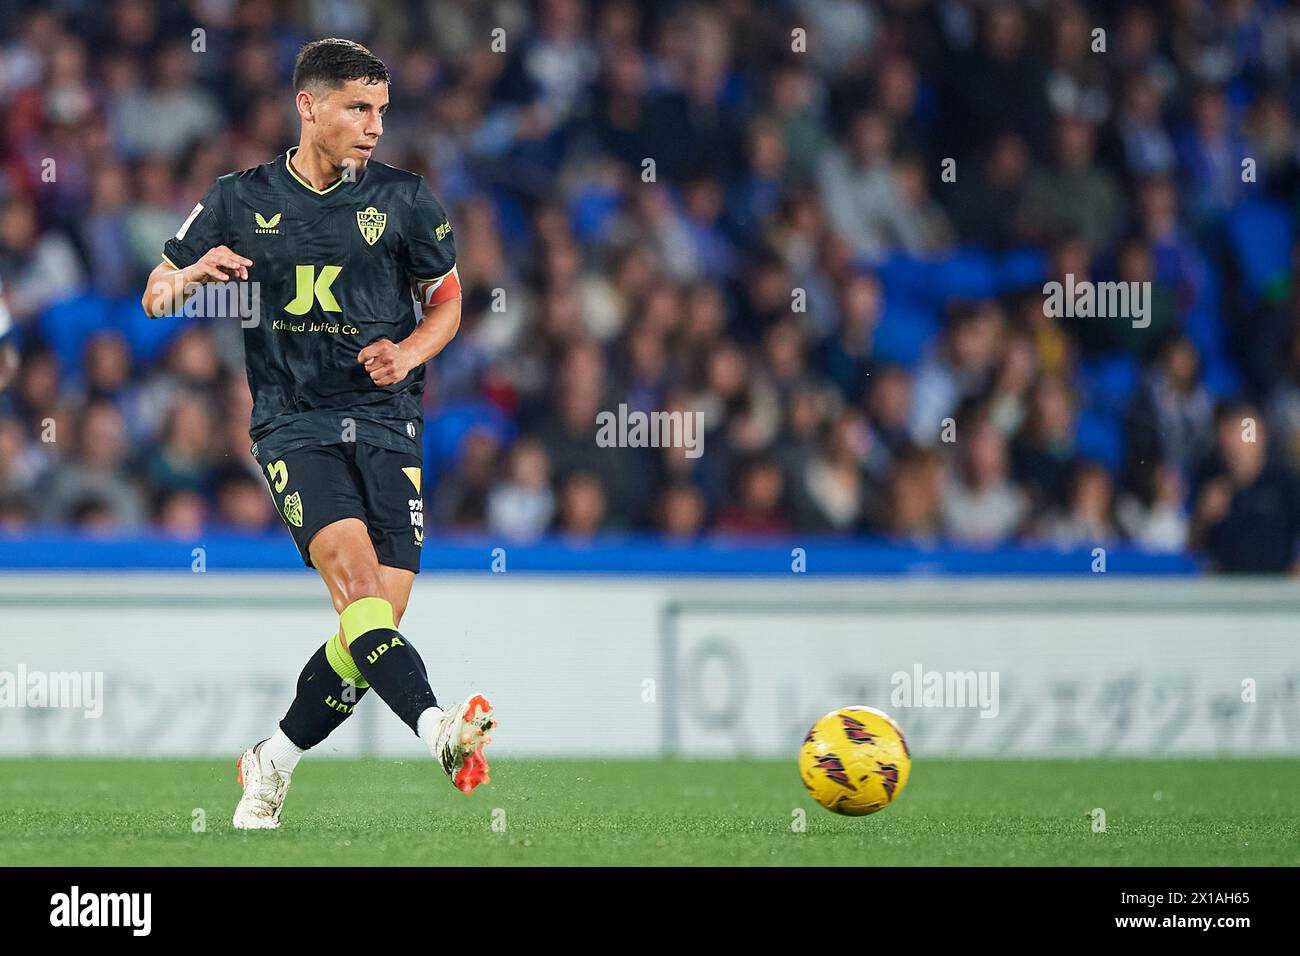 Lucas Robertone of UD Almeria with the ball during the LaLiga EA Sports match between Real Sociedad and UD Almeria at Reale Arnea Stadium on April 14, Stock Photo